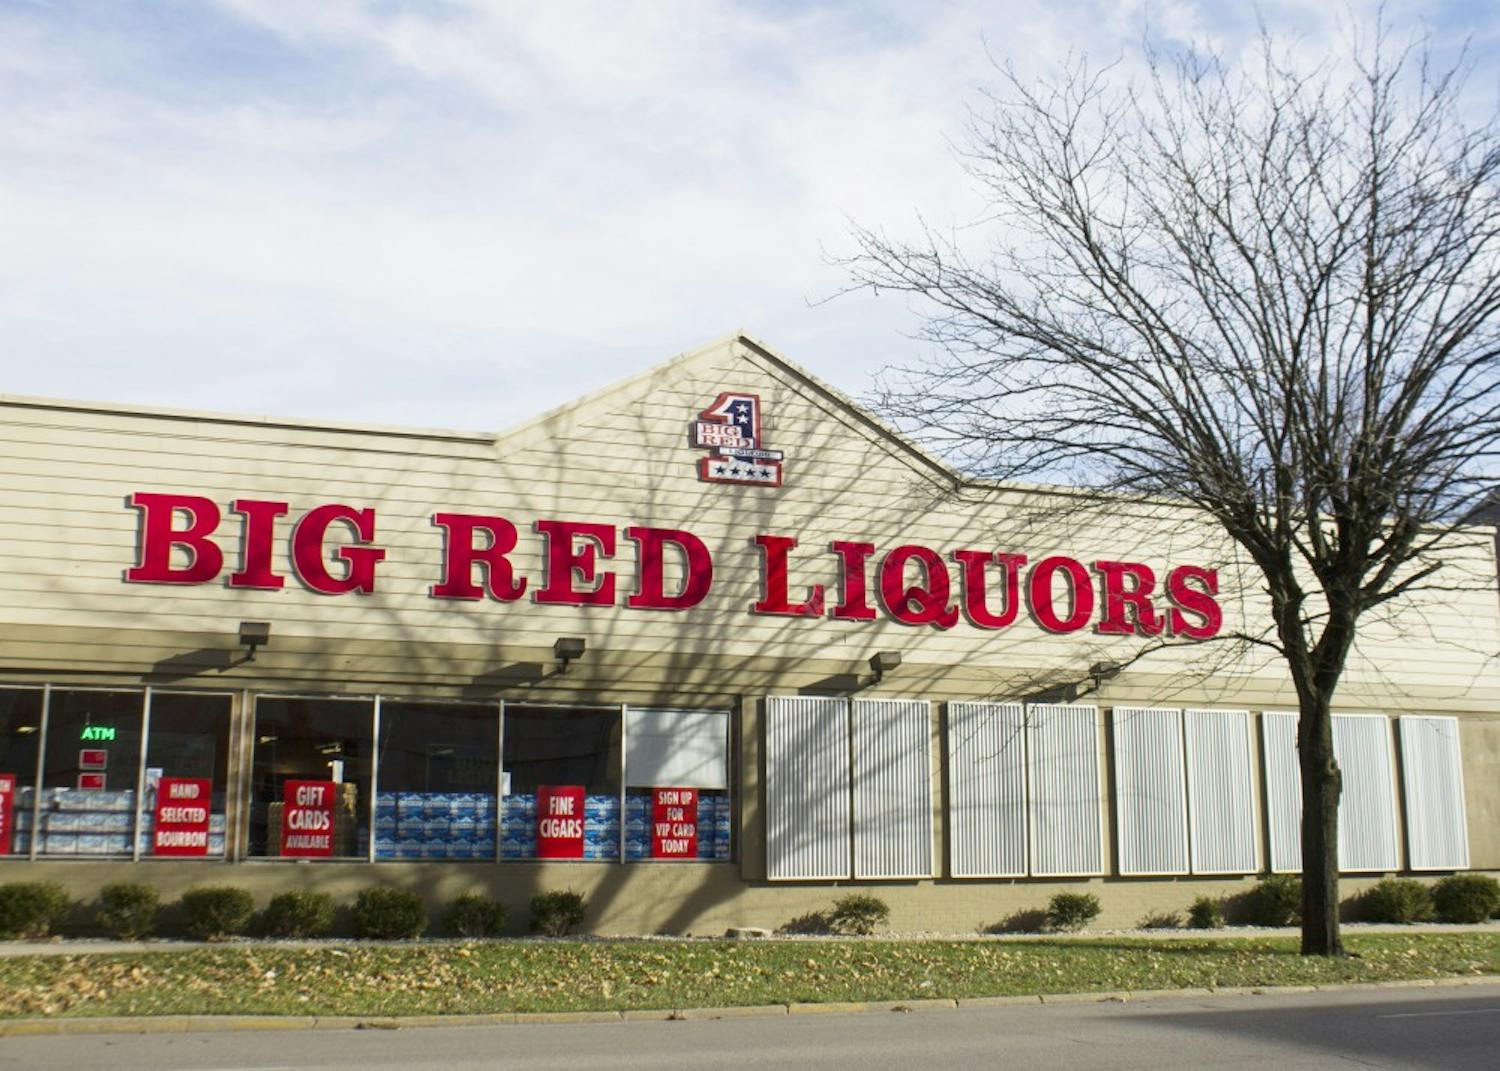 Big Red Liquors, located on North College Avenue, can't sell alcohol on Sundays due to the Indiana law from 1853 preventing it from doing so. This could change though, as the Indiana Alcohol Code Revision Commission reviews alcohol-related laws, many of which have been in place since Prohibition.